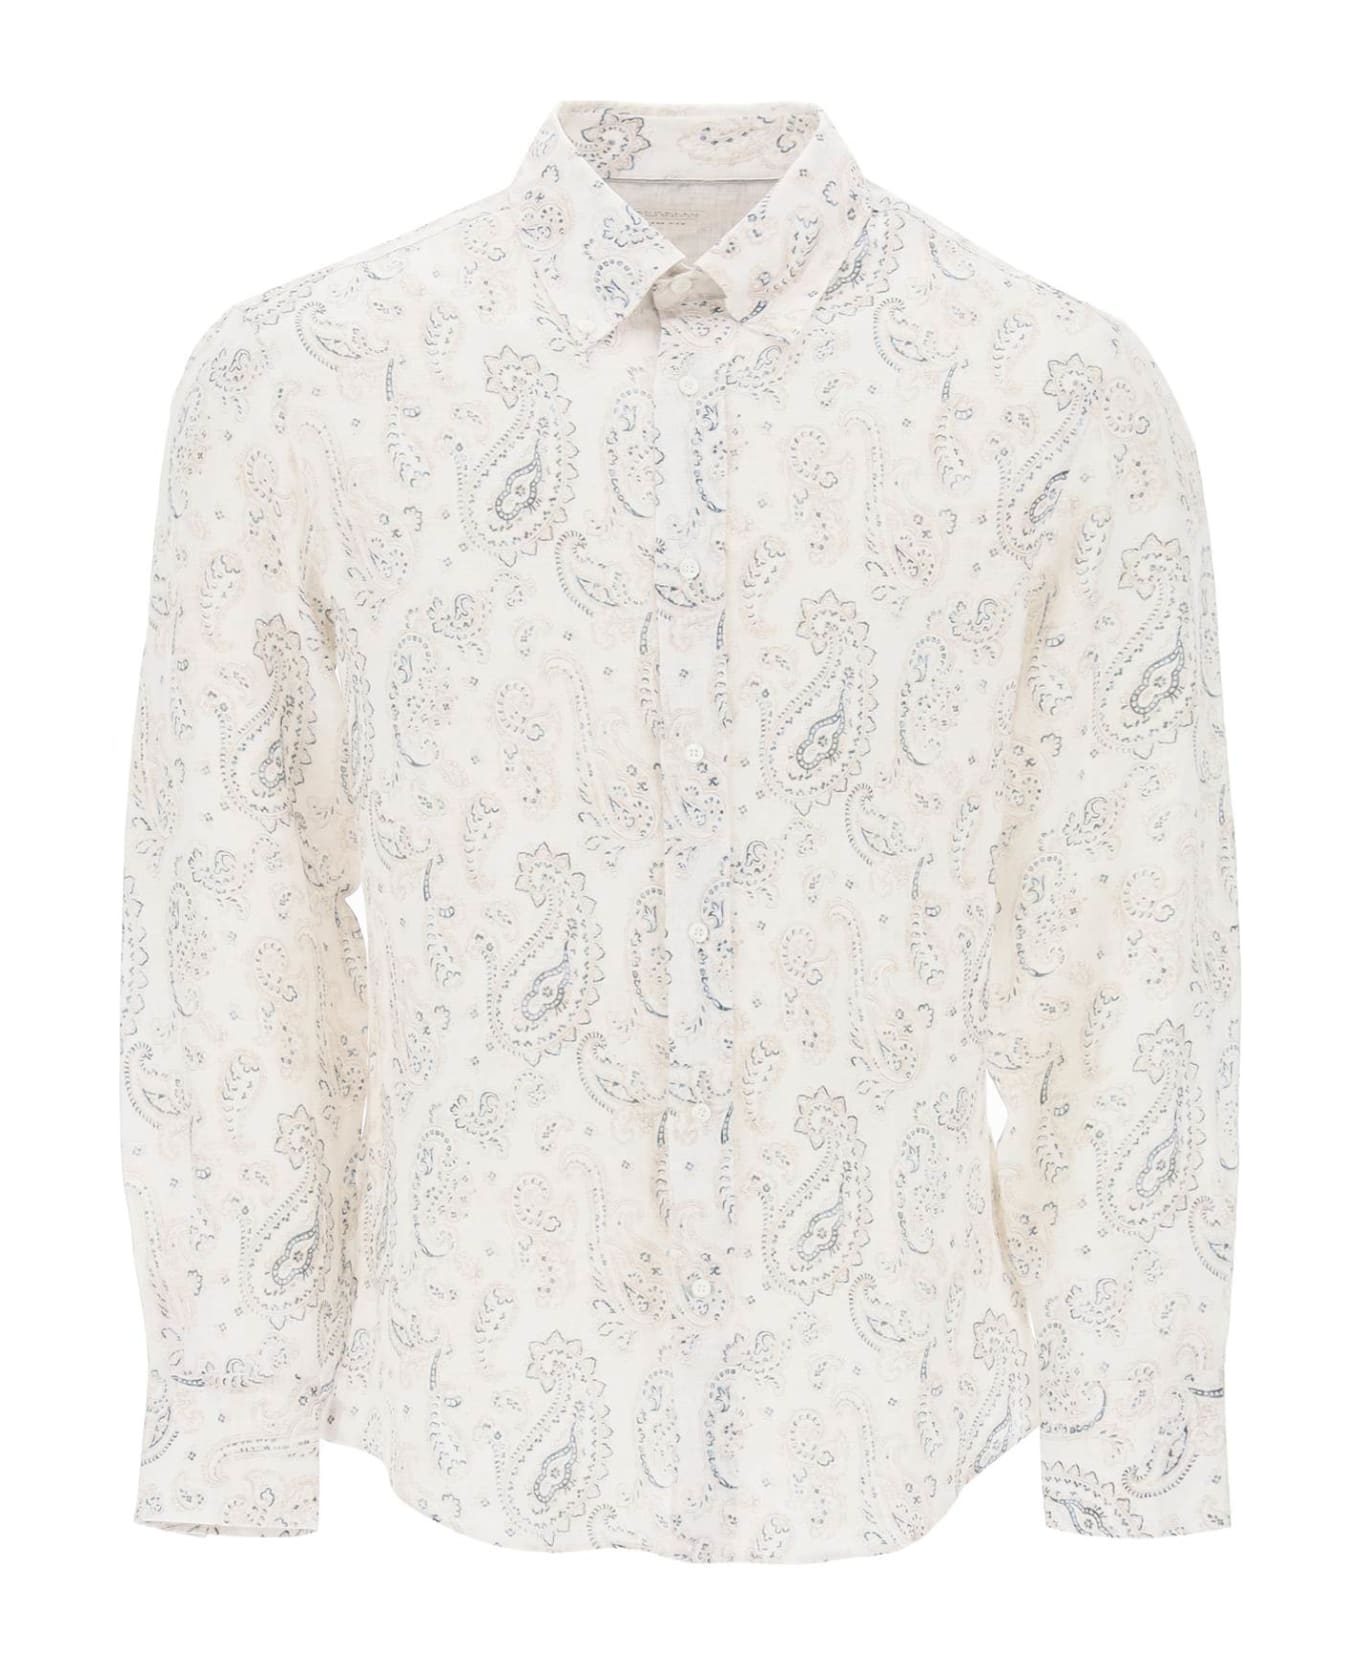 Brunello Cucinelli Linen Shirt With Paisley Pattern - BROWN PRUSSIA (White)